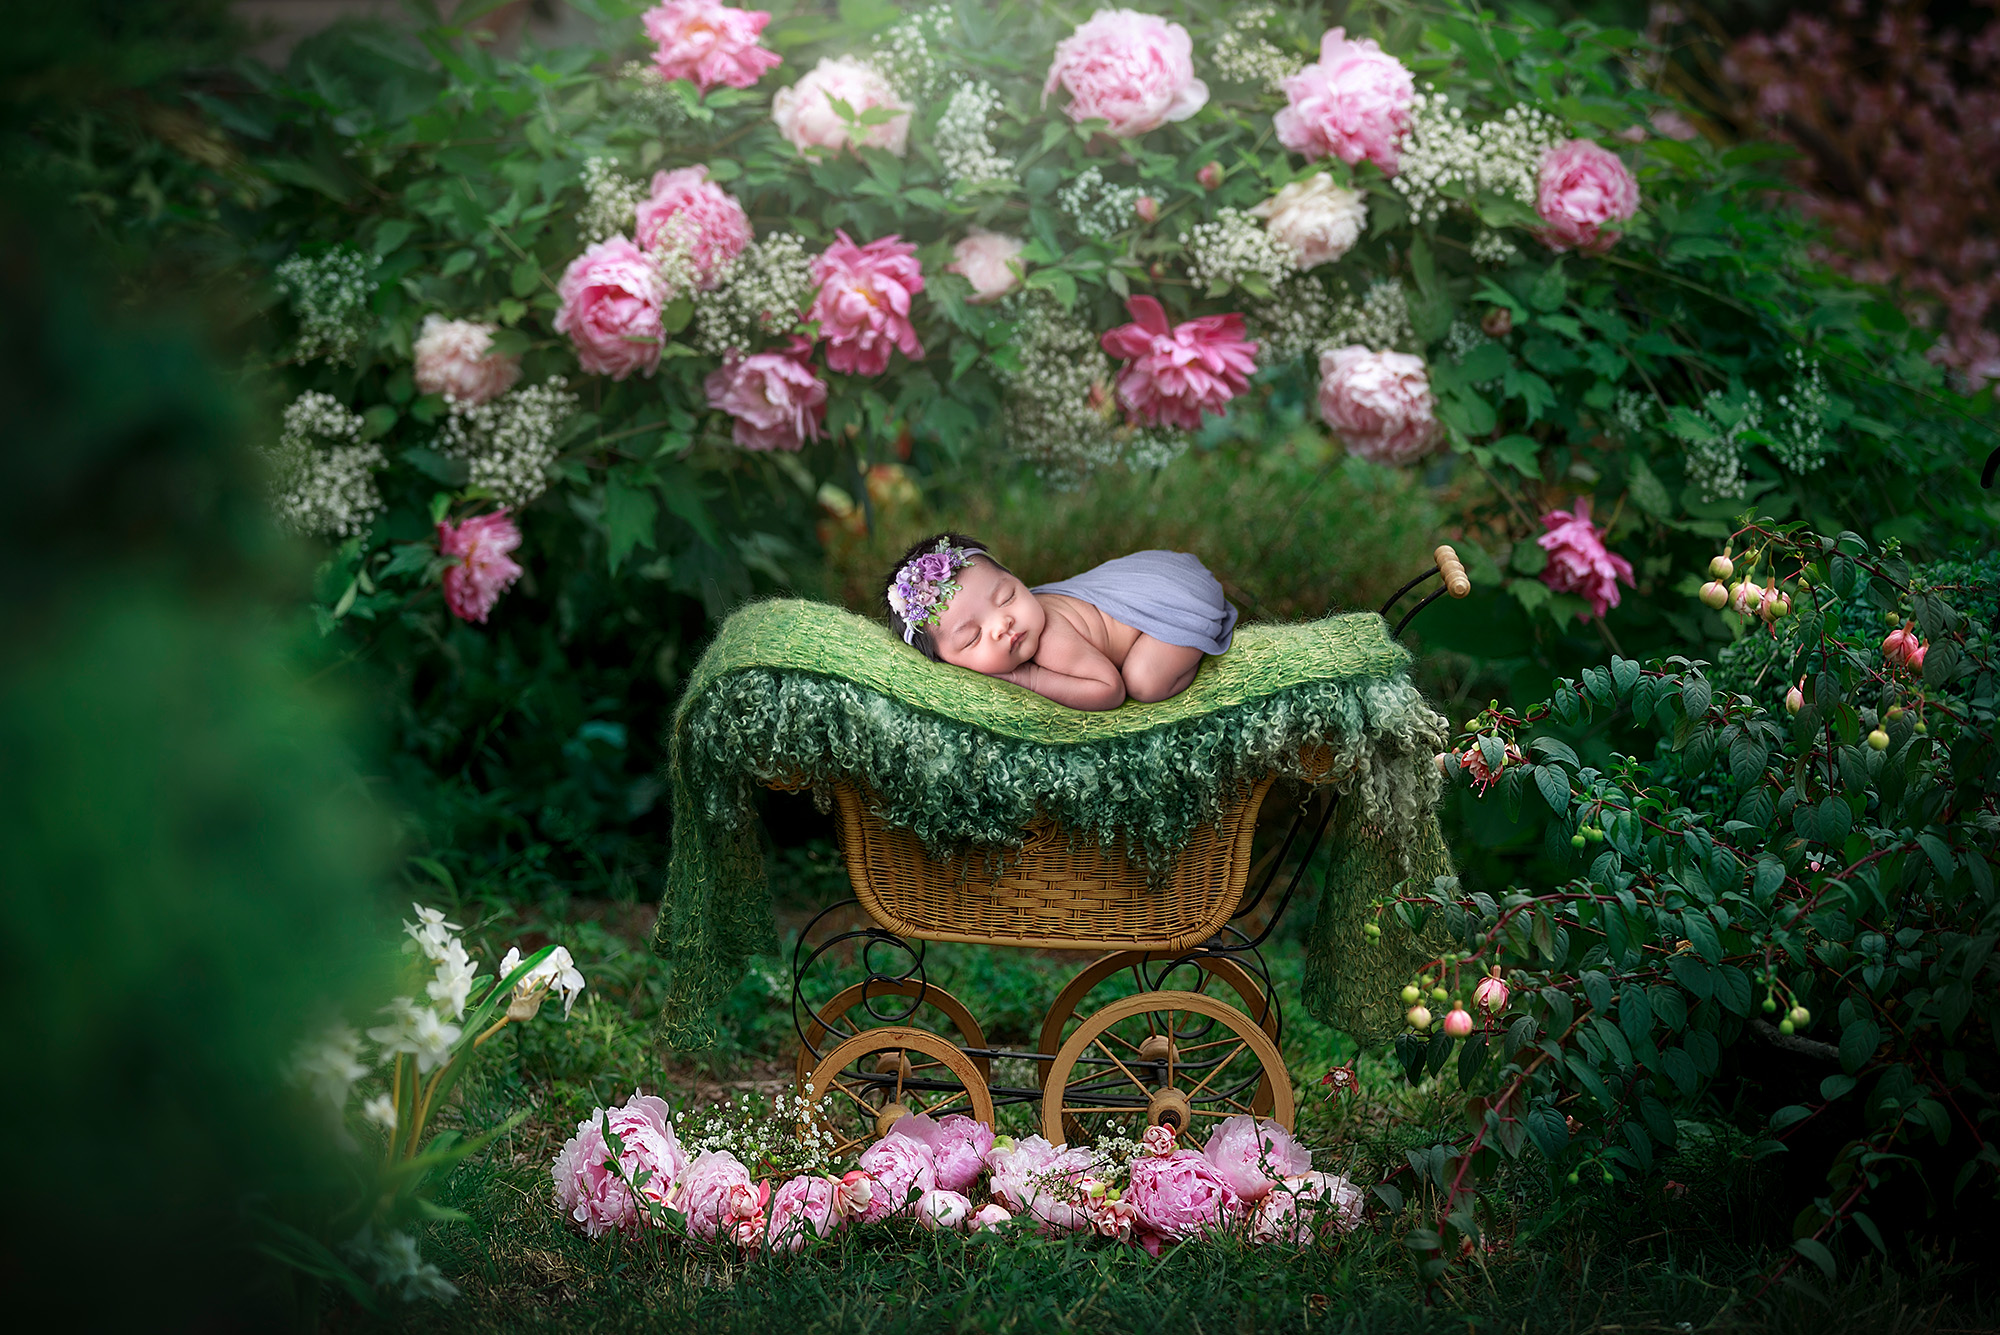 Newborn Photos Full of Color newborn baby girl sound asleep on wooden carriage in a forest of pink flowers